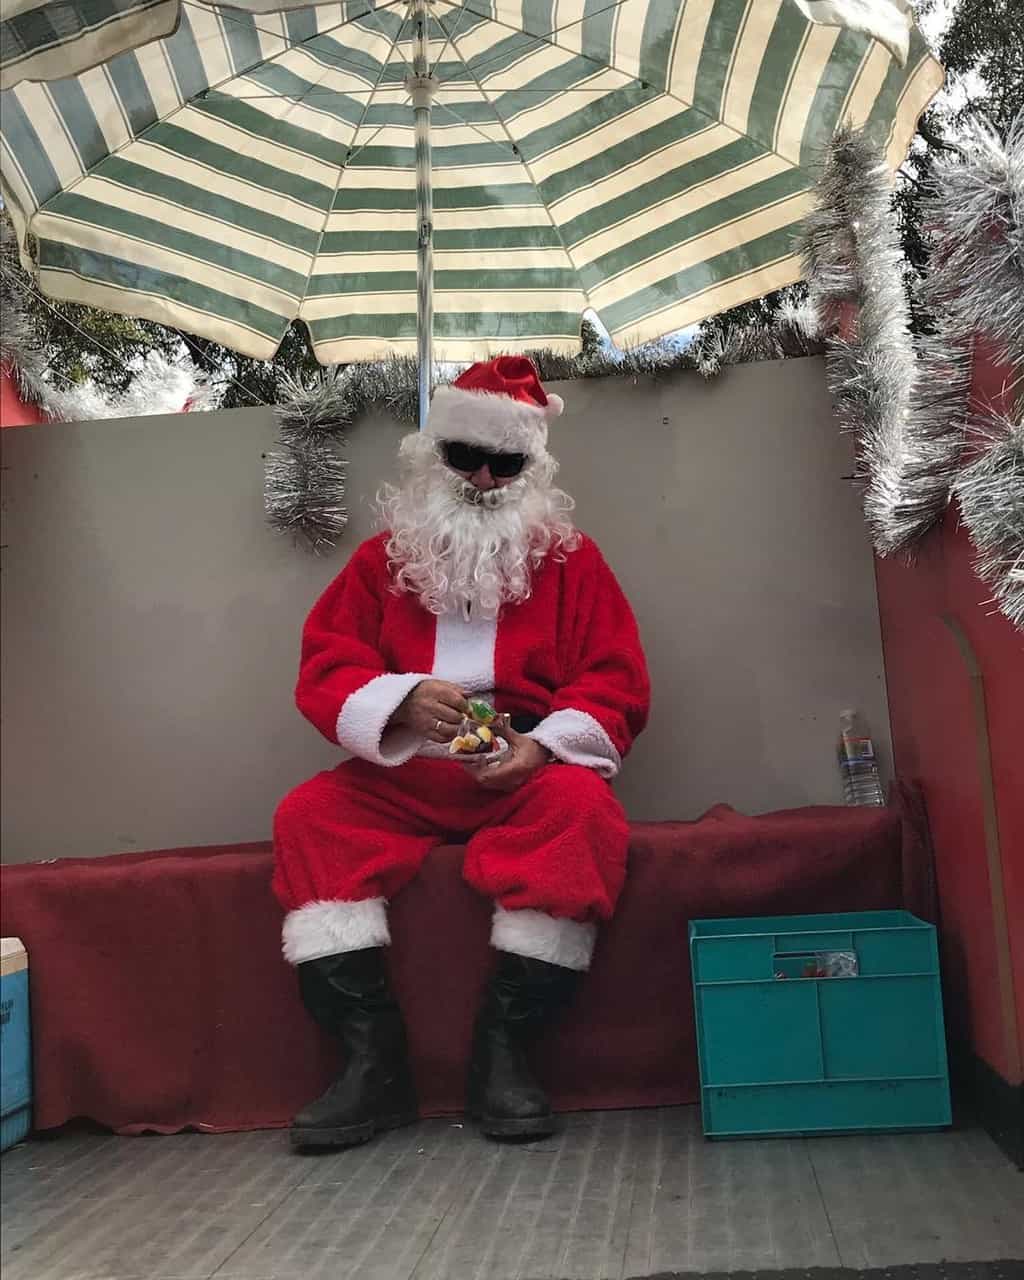 CFA Santa with his crate. Merry Christmas everyone.